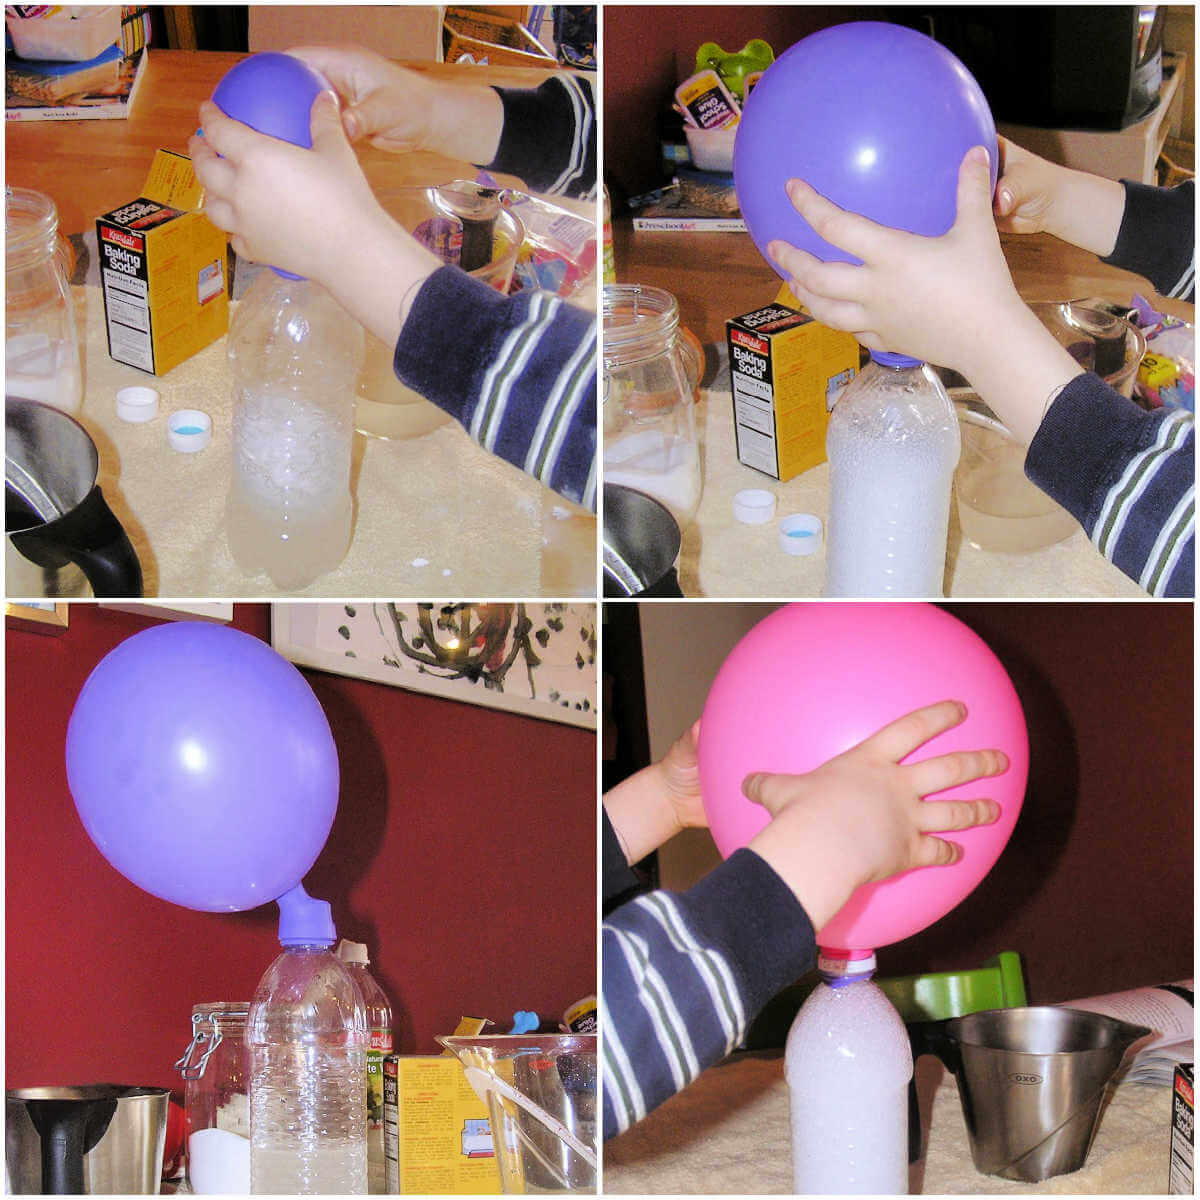 Collage of balloon experiment. Child placing purple balloon on vinegar filled bottle, child holding purple balloon as it inflates, inflated purple balloon on bottle, child holding inflated pink balloon